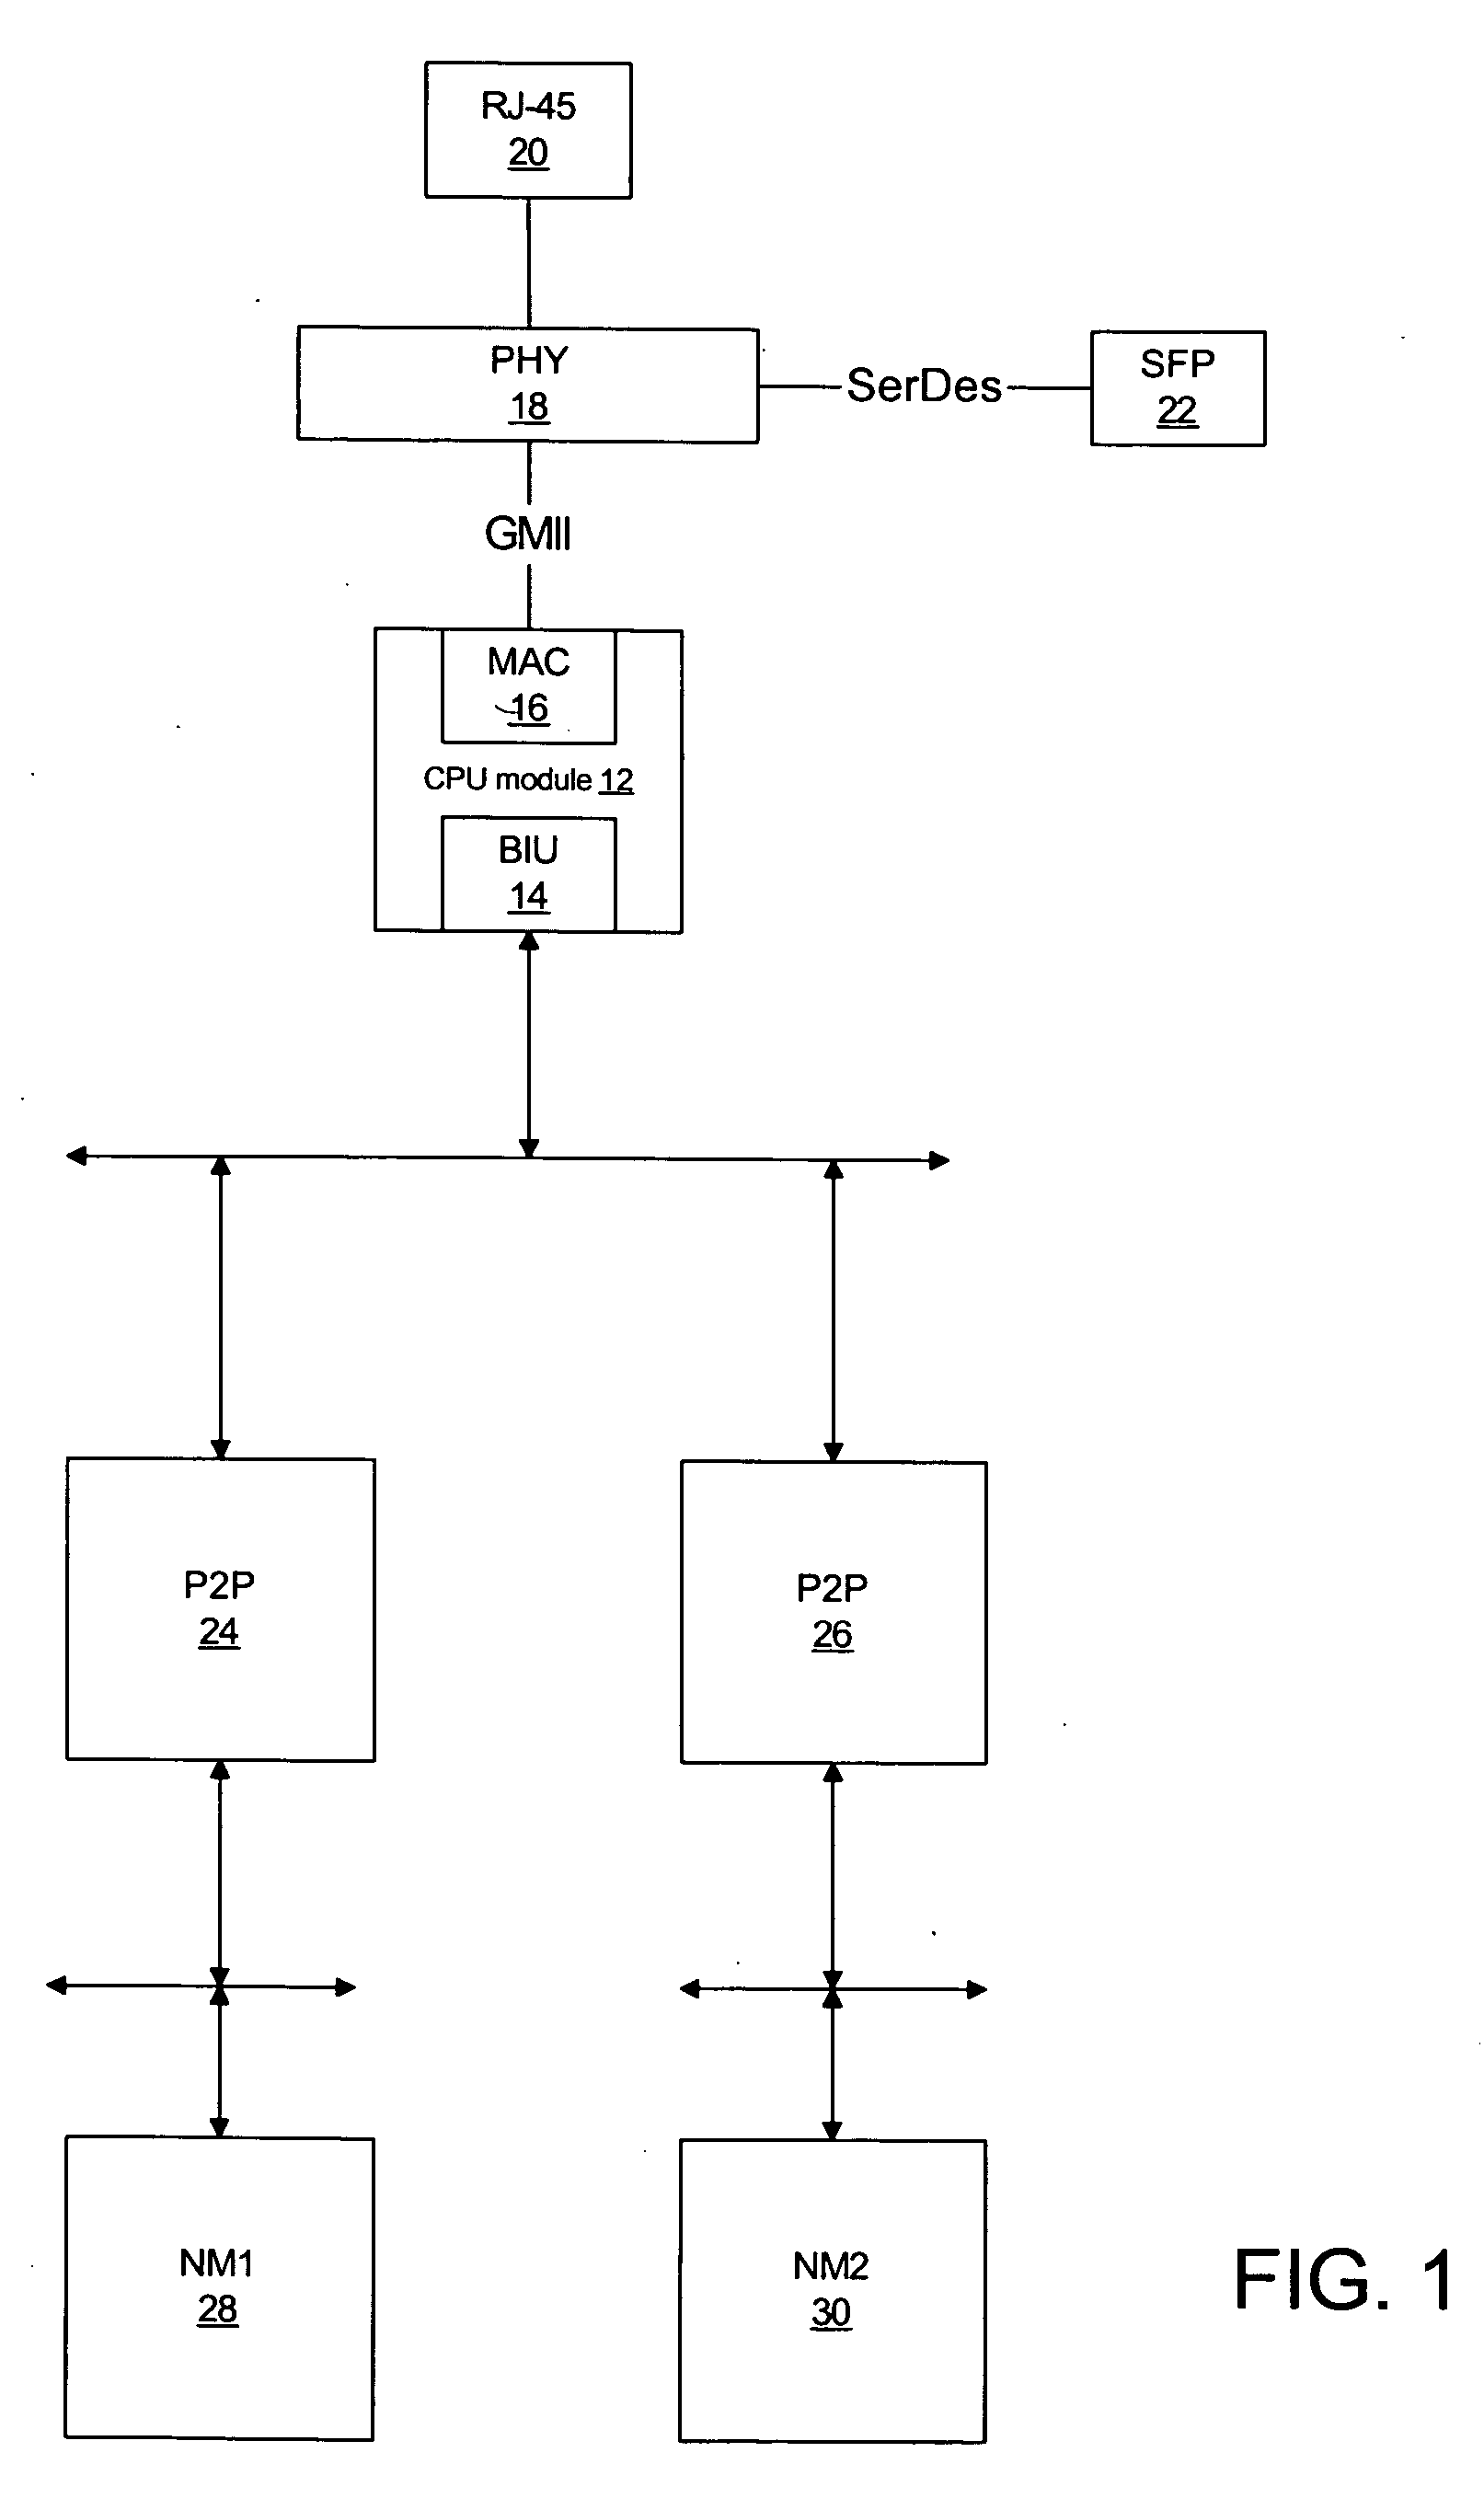 Method and system for configuring high-speed serial links between components of a network device